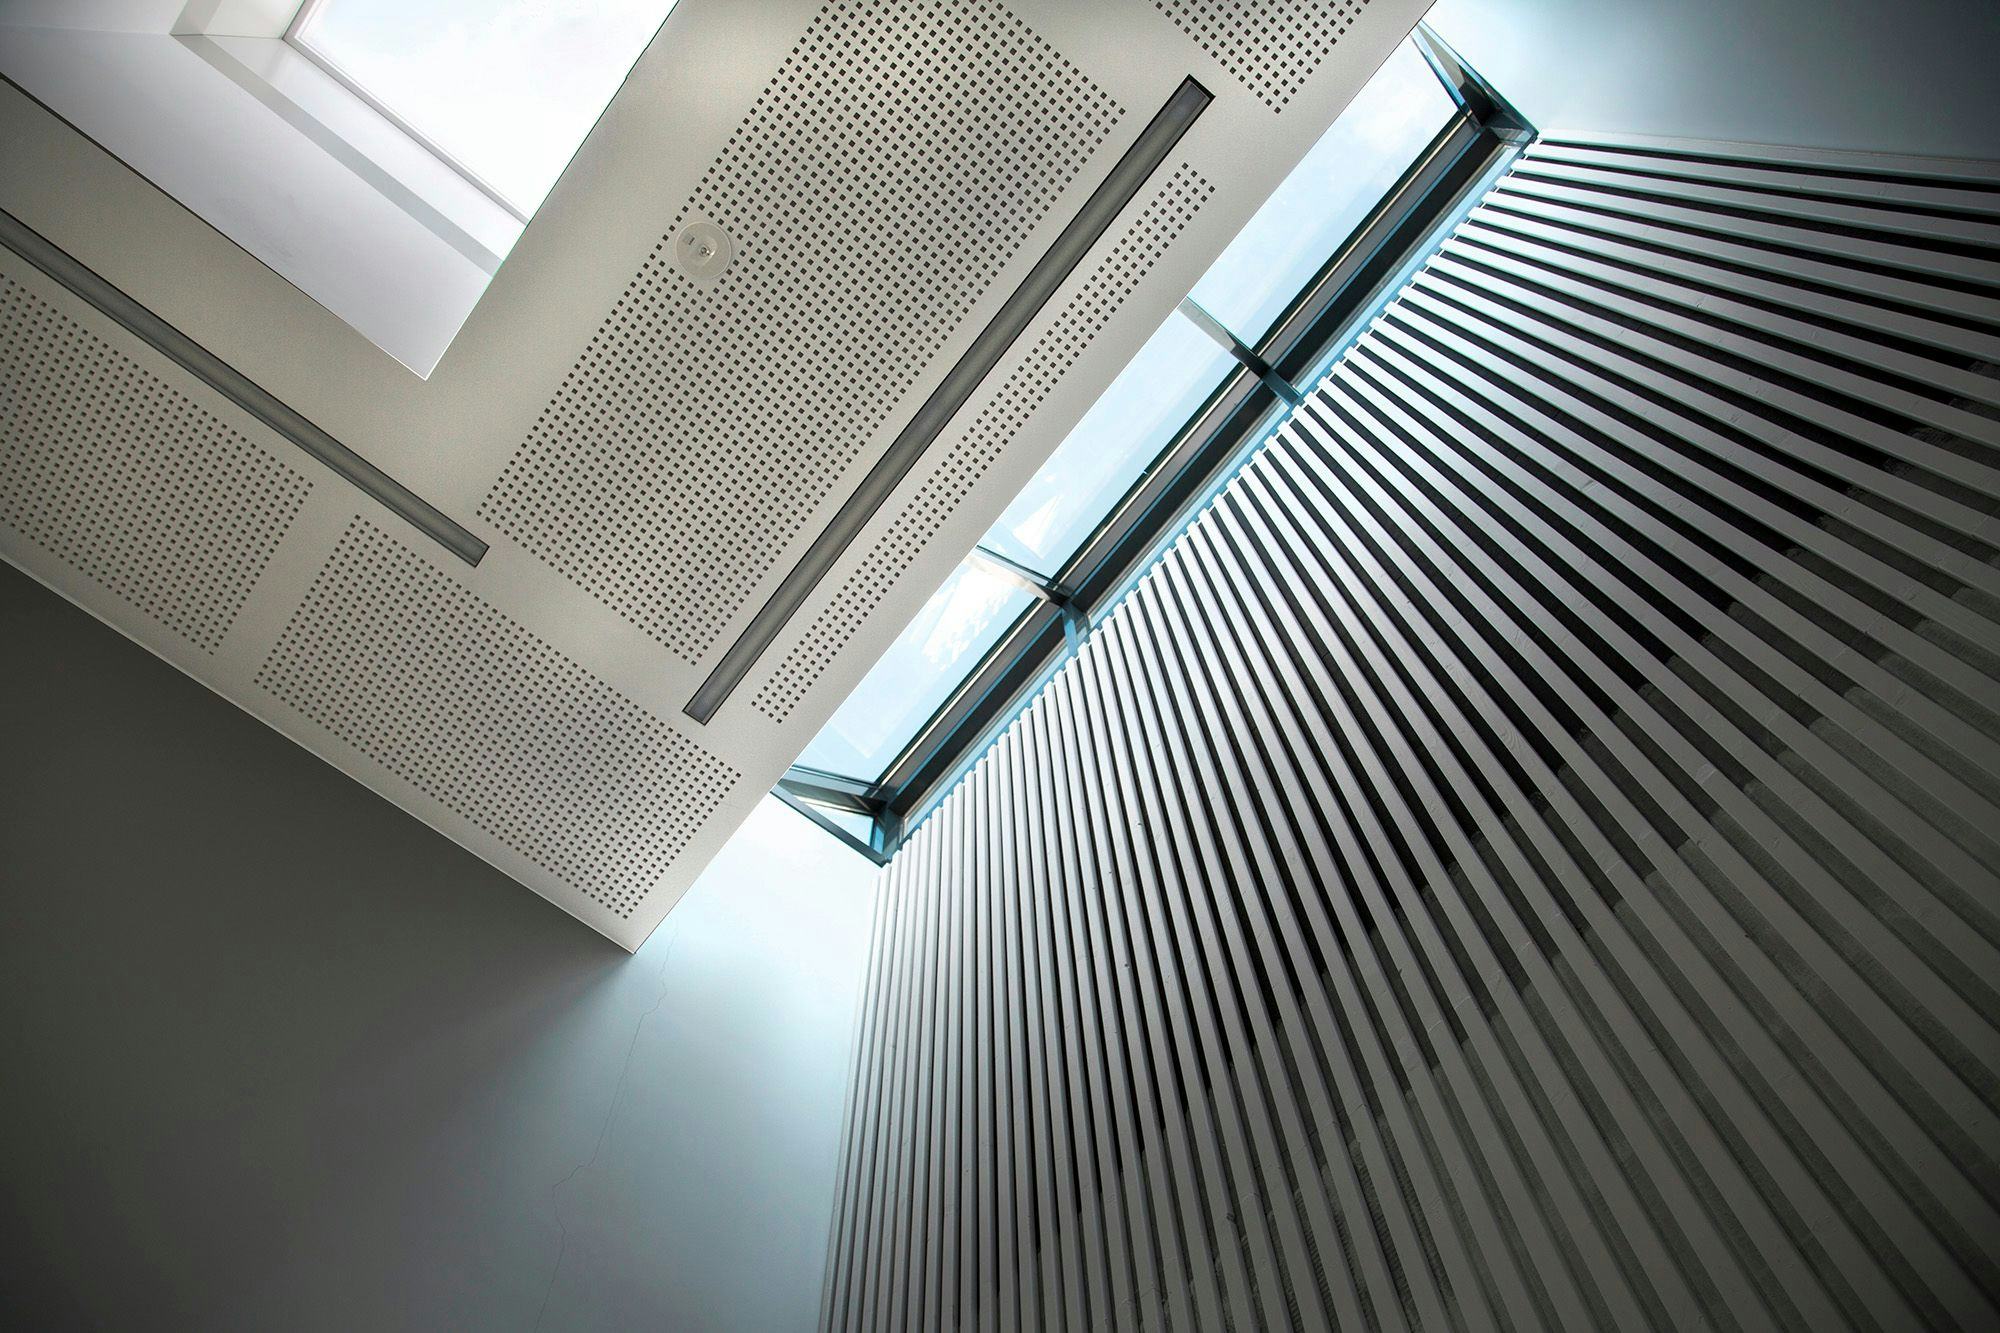 Ventilated white ceiling with glass windows